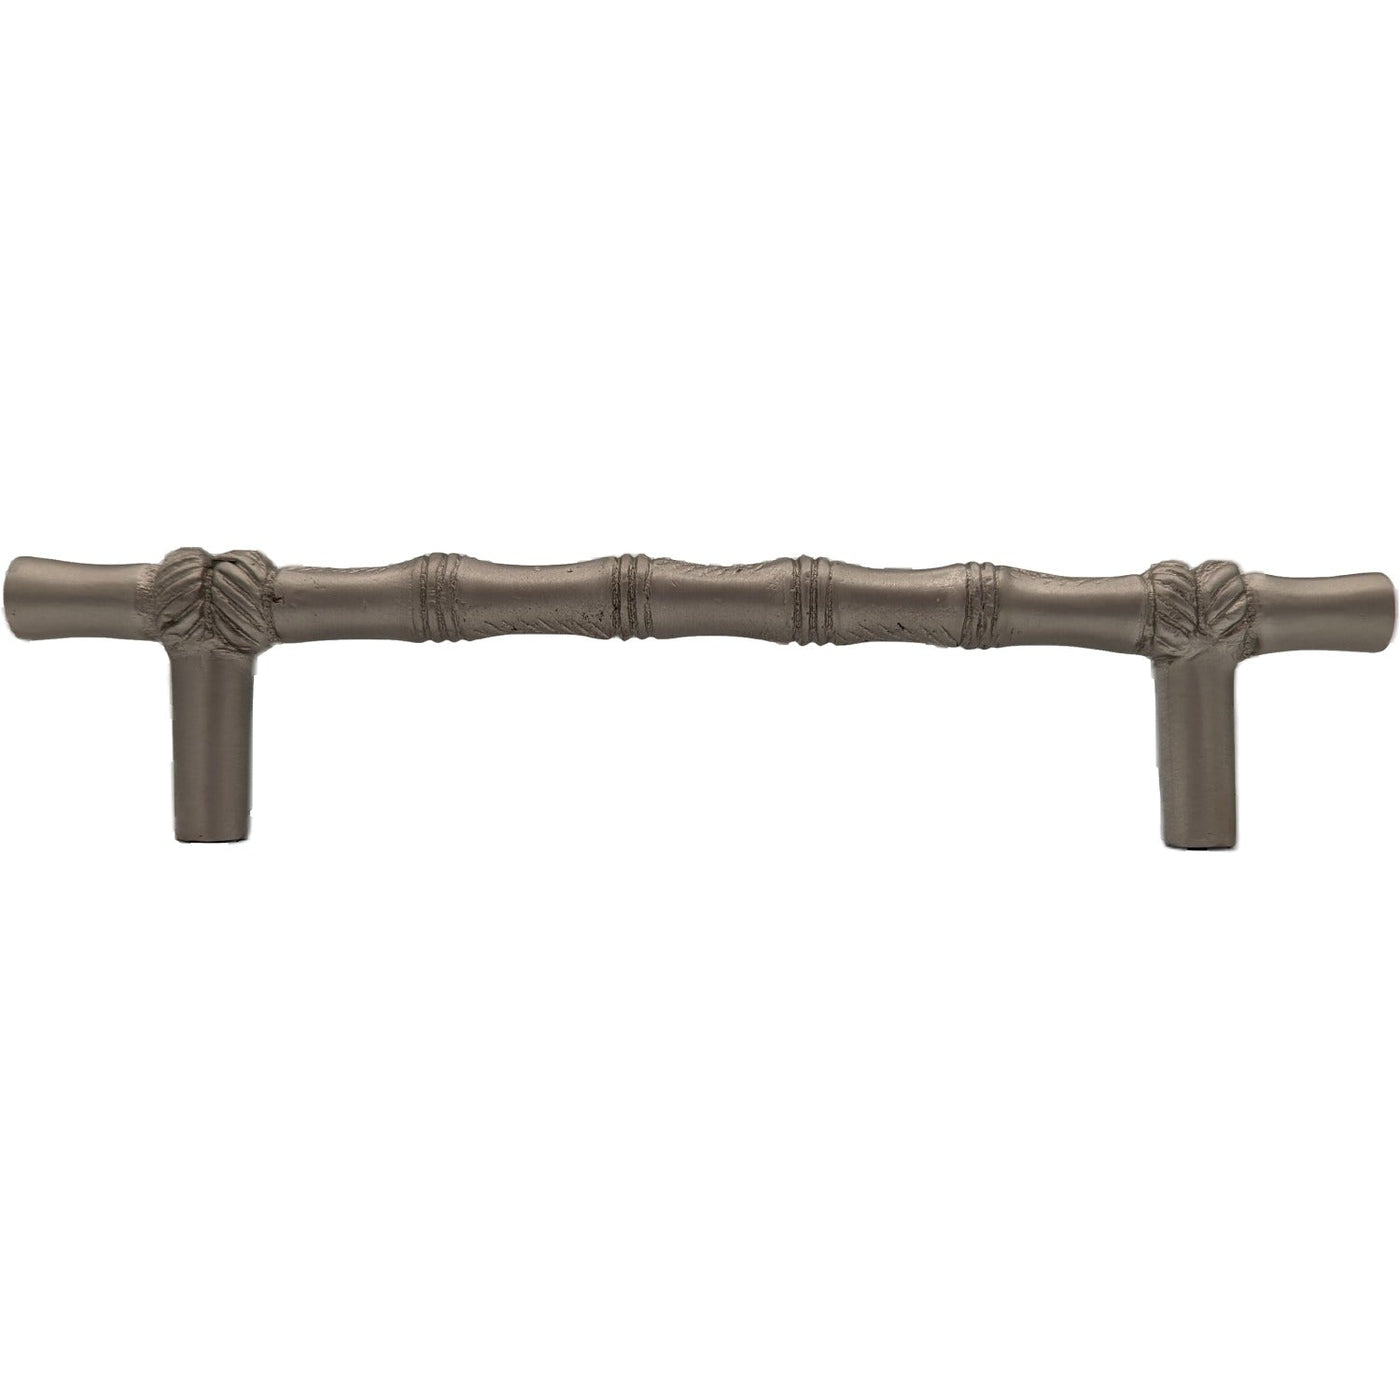 6 Inch Overall (4 1/2 Inch c-c) Japanese Bamboo Pull (Brushed Nickel Finish)